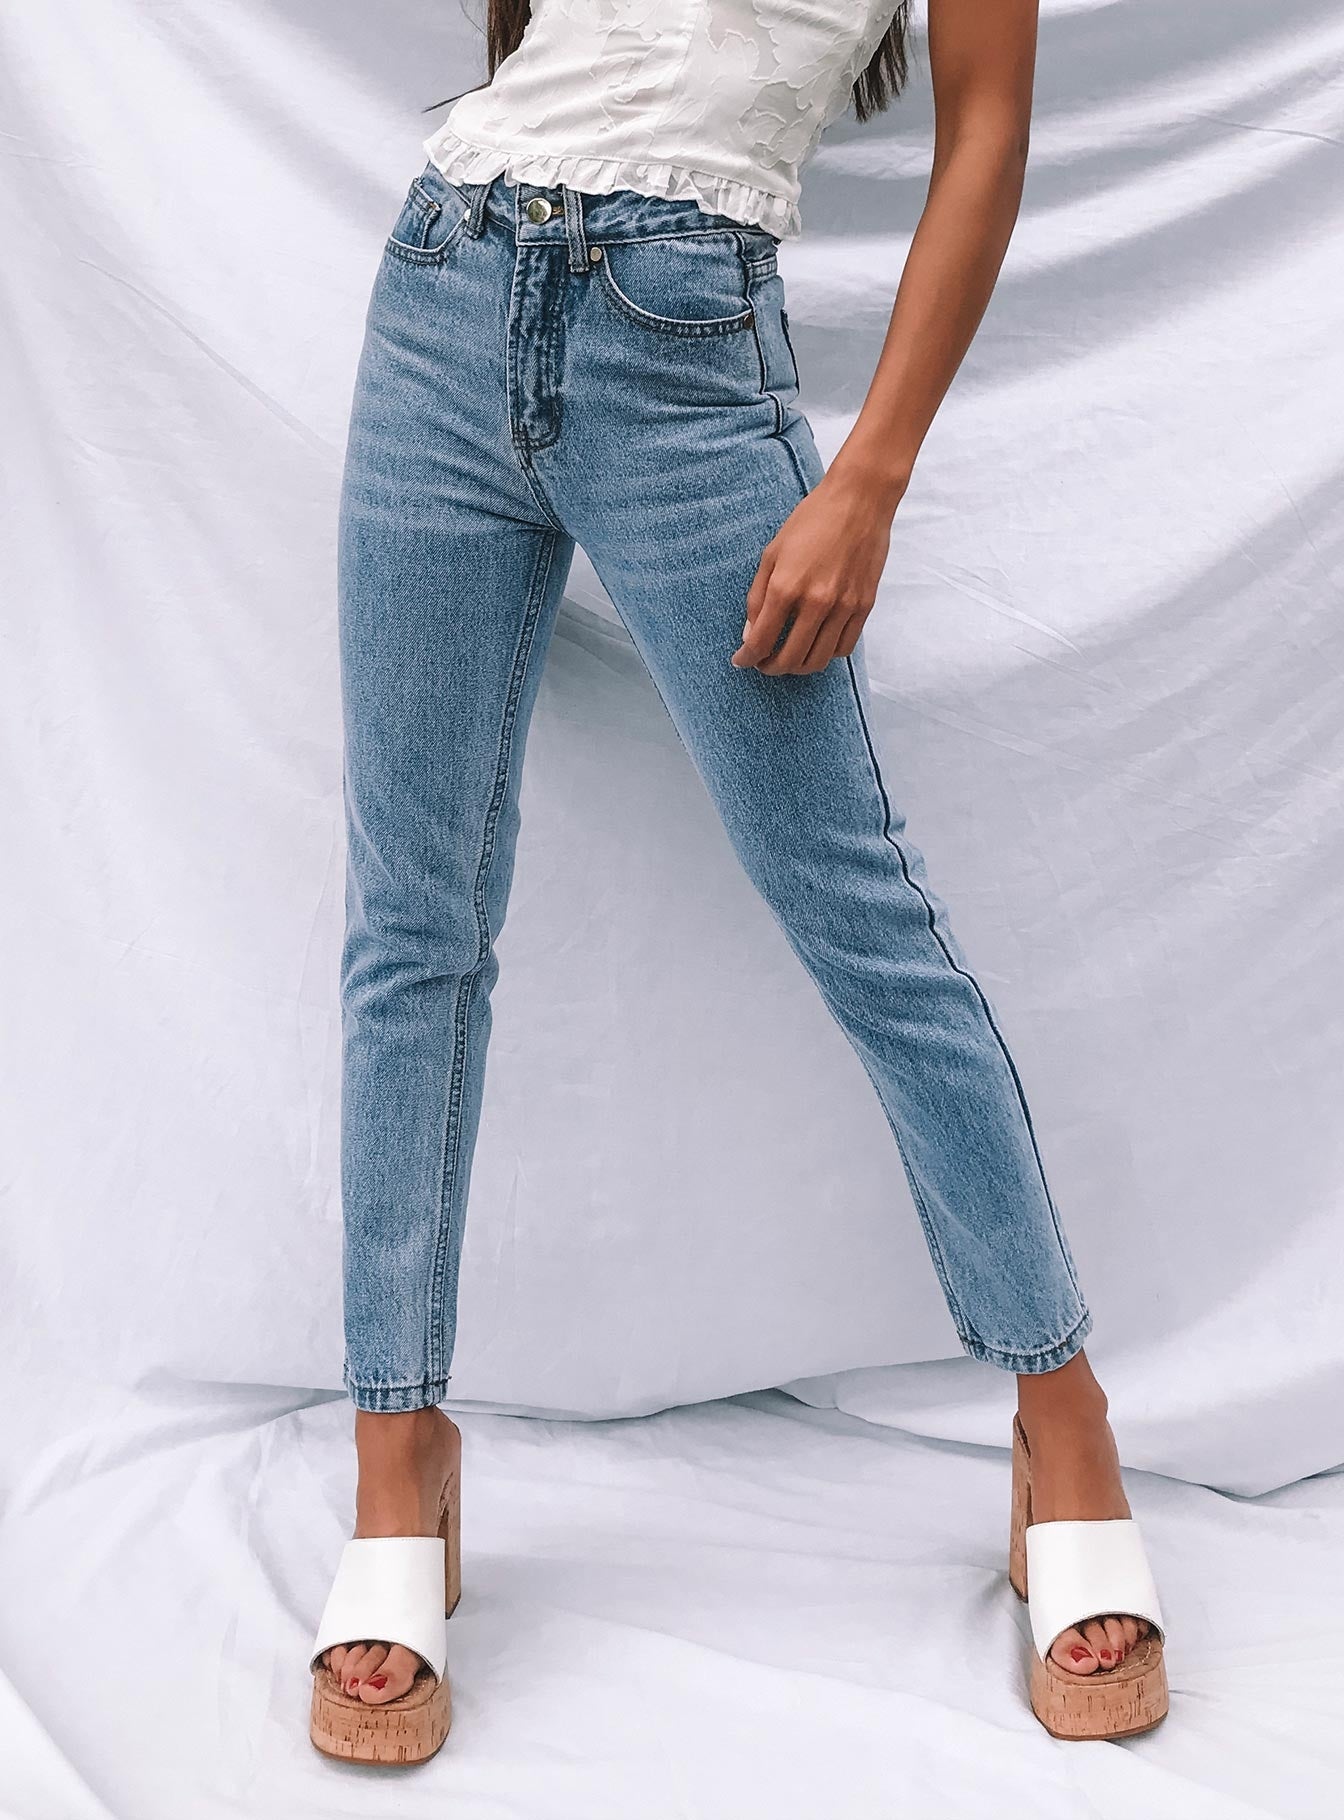 34 jeans size in cm